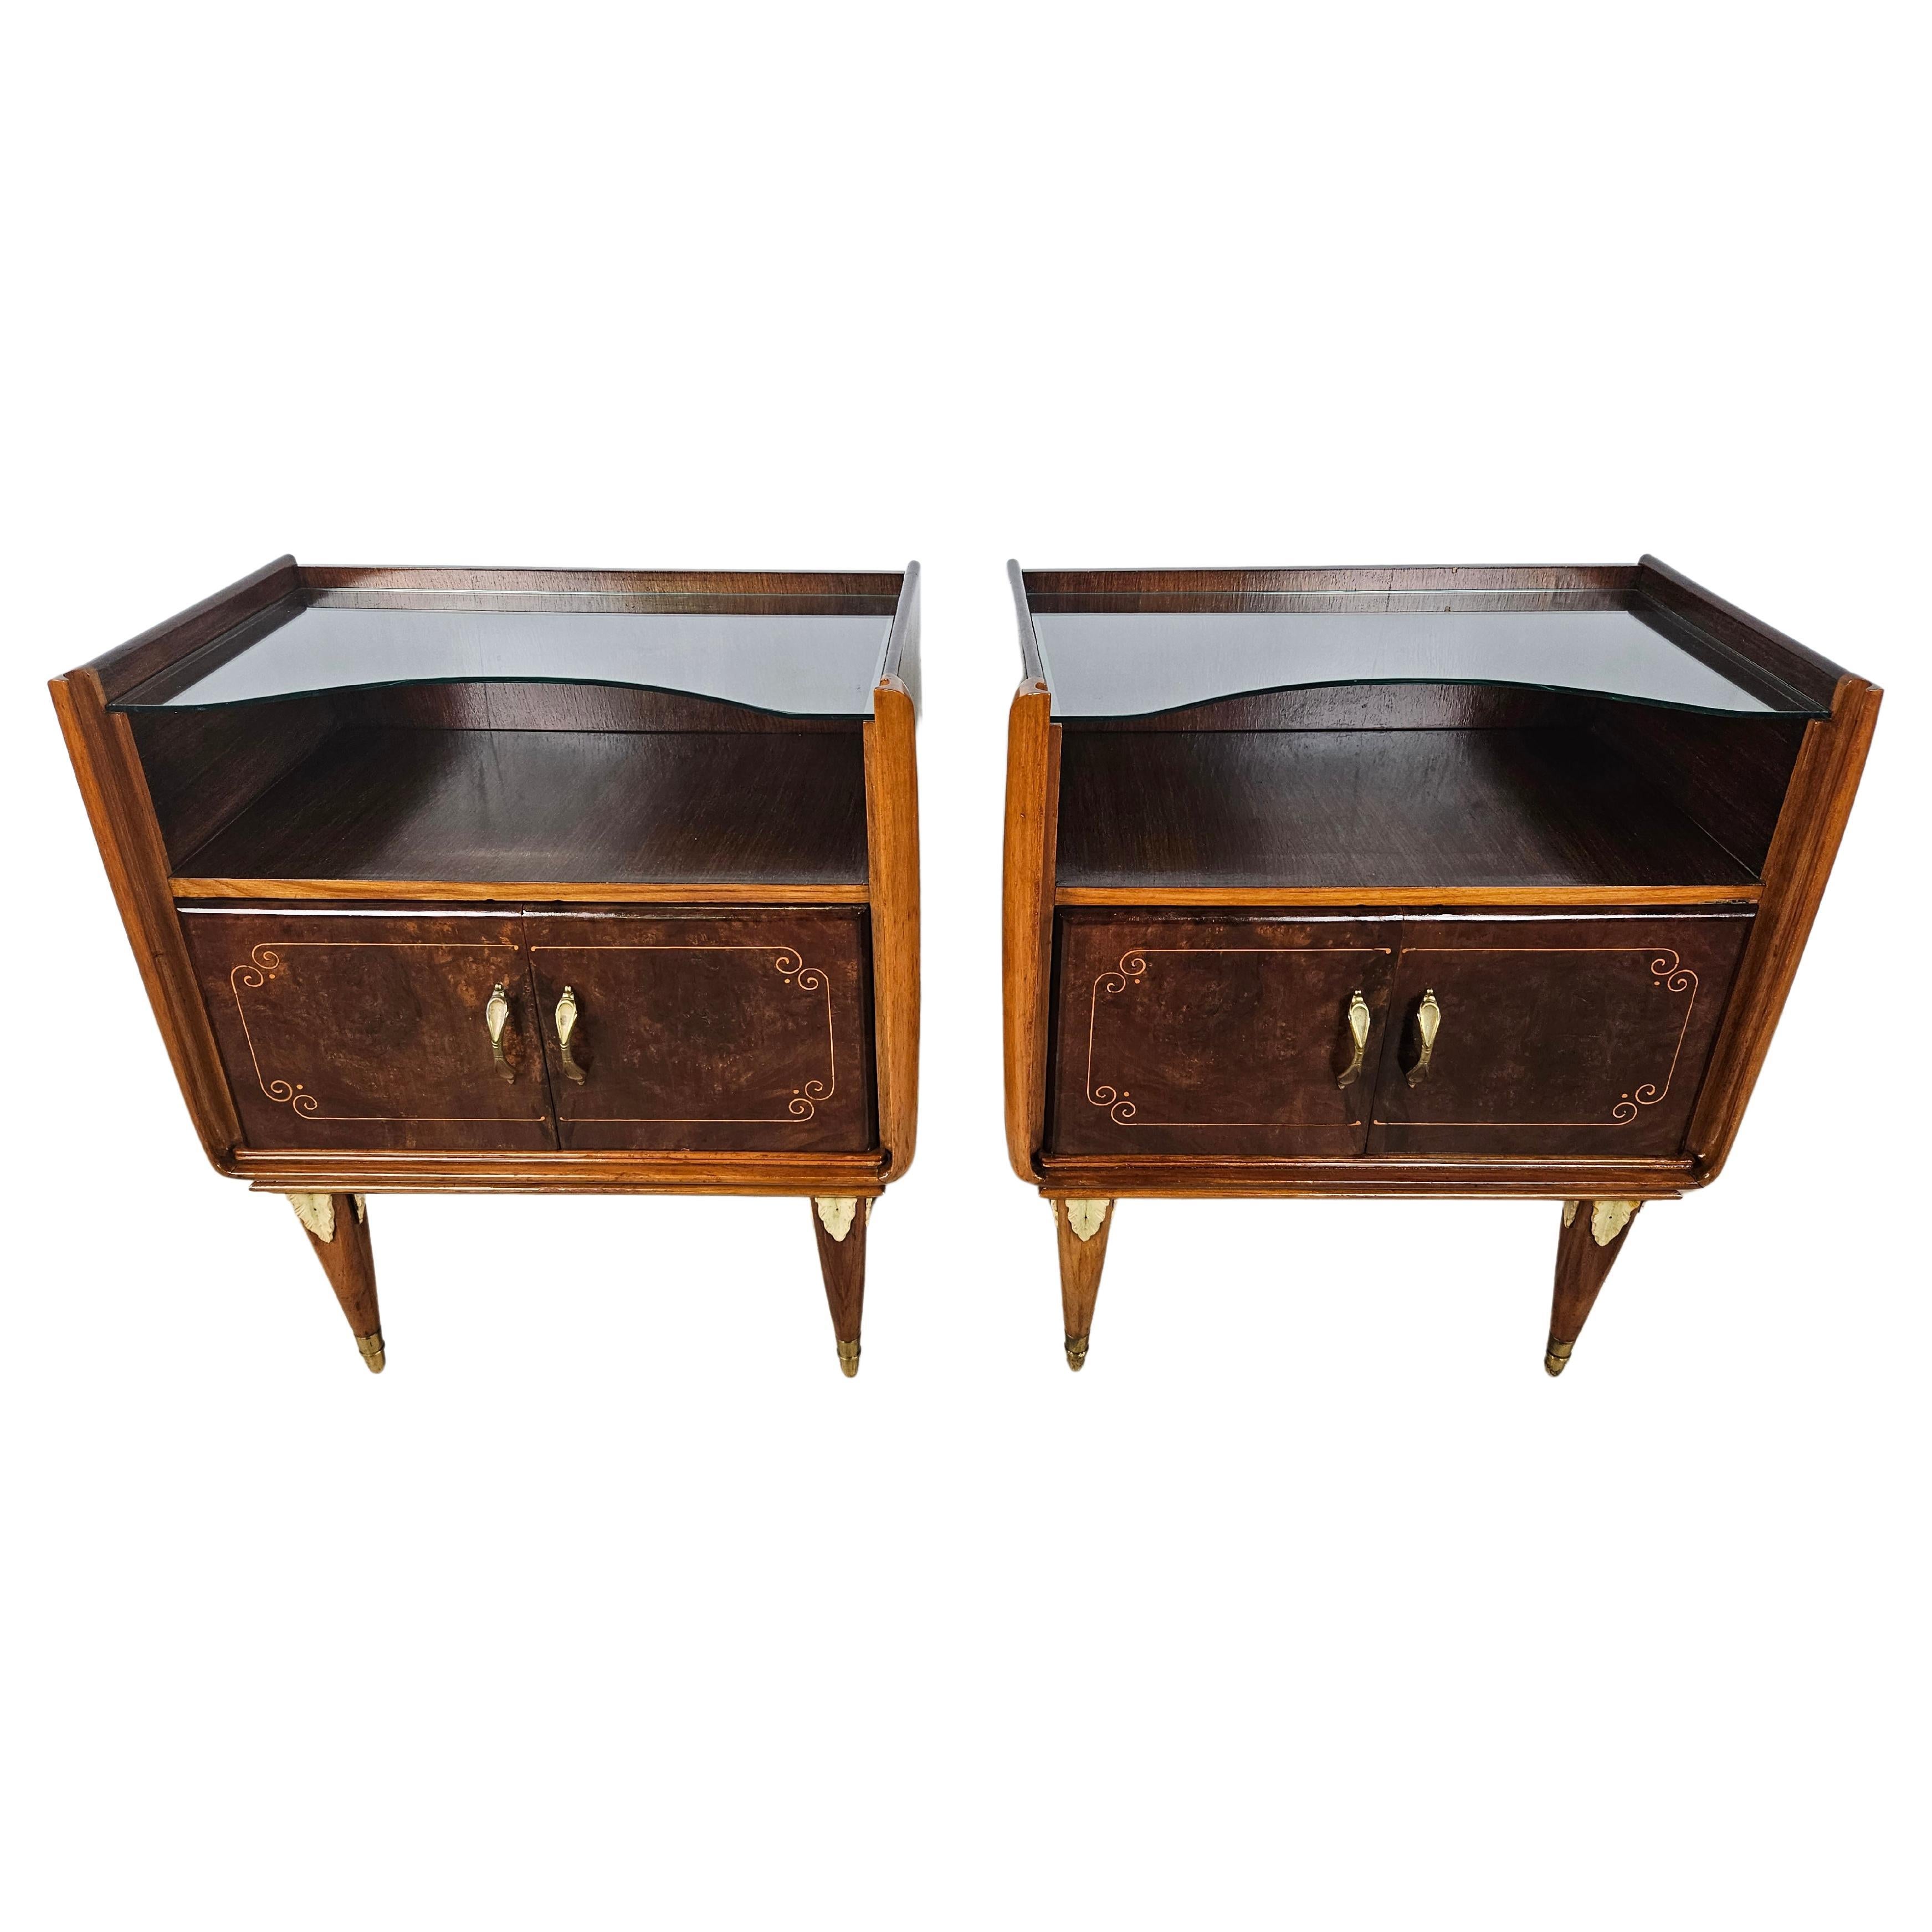 Walnut and maple bedside tables with glass top